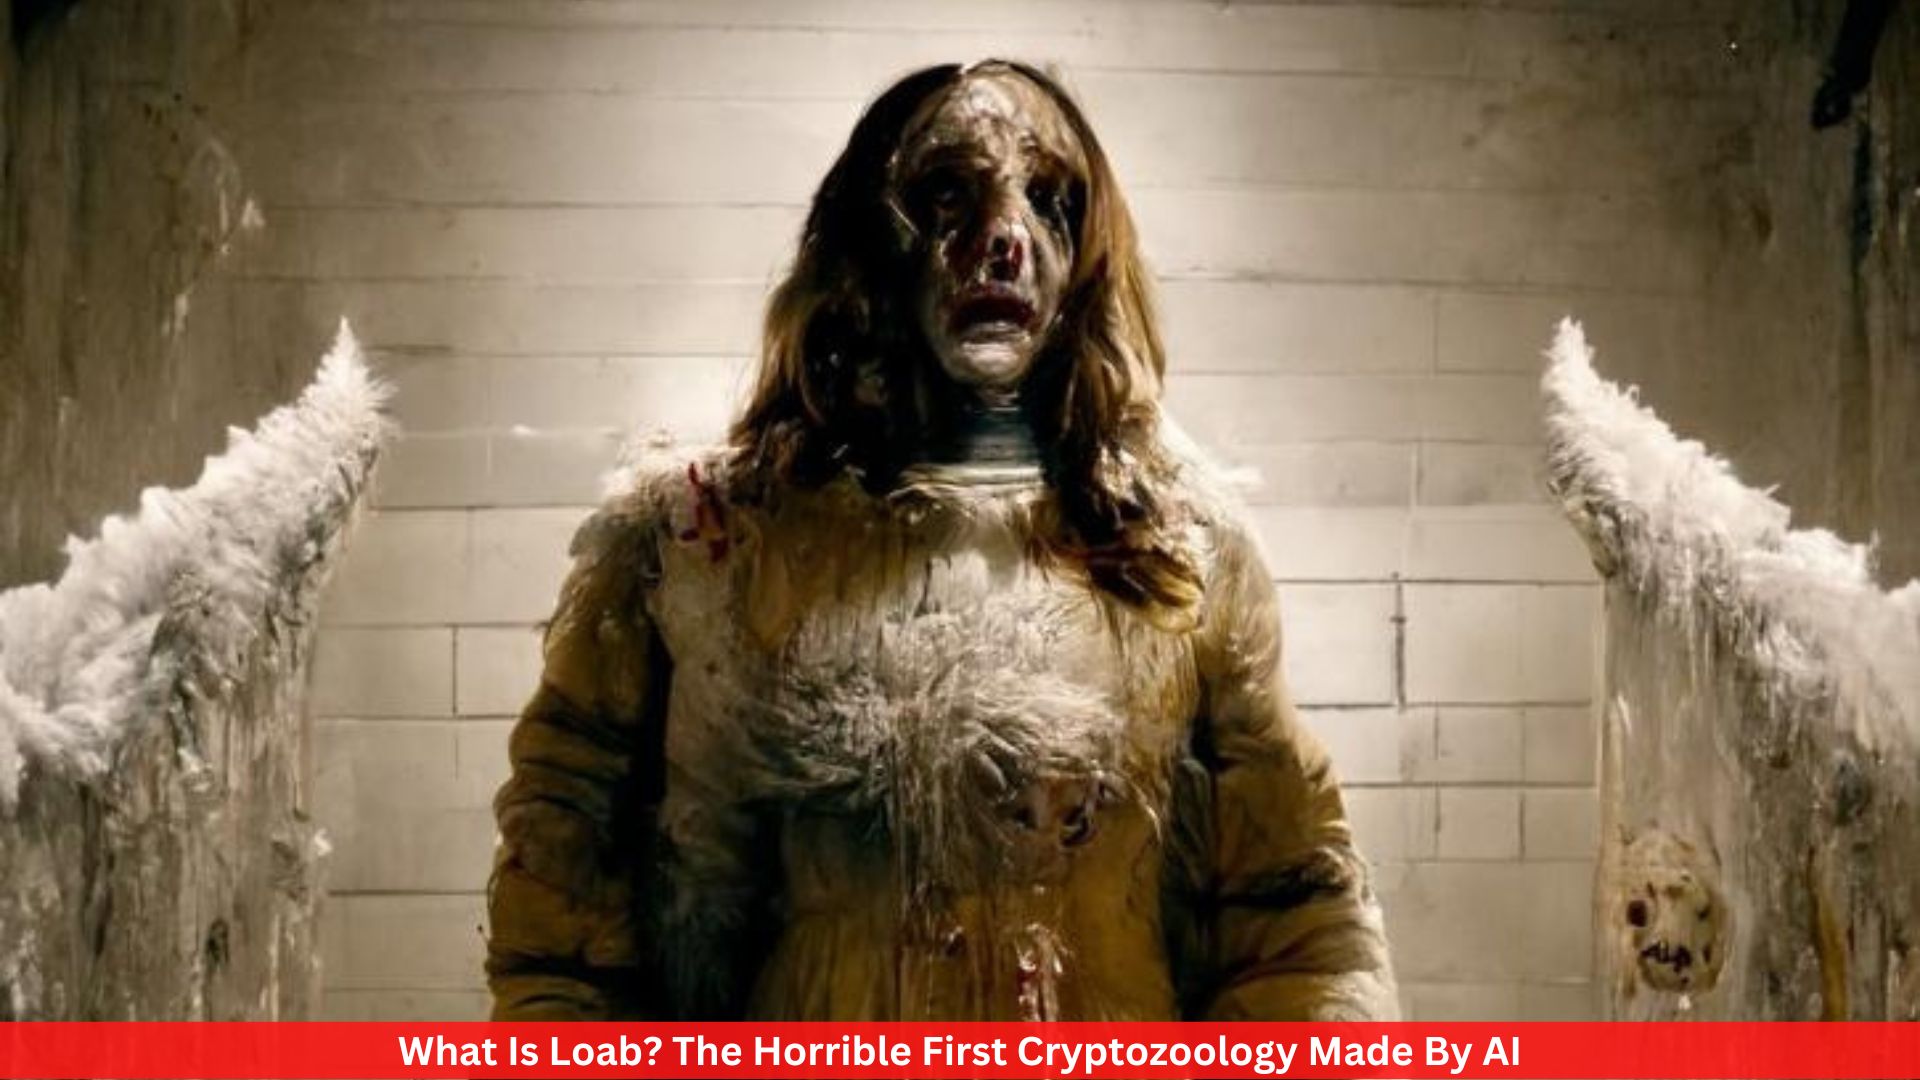 What Is Loab? The Horrible First Cryptozoology Made By AI